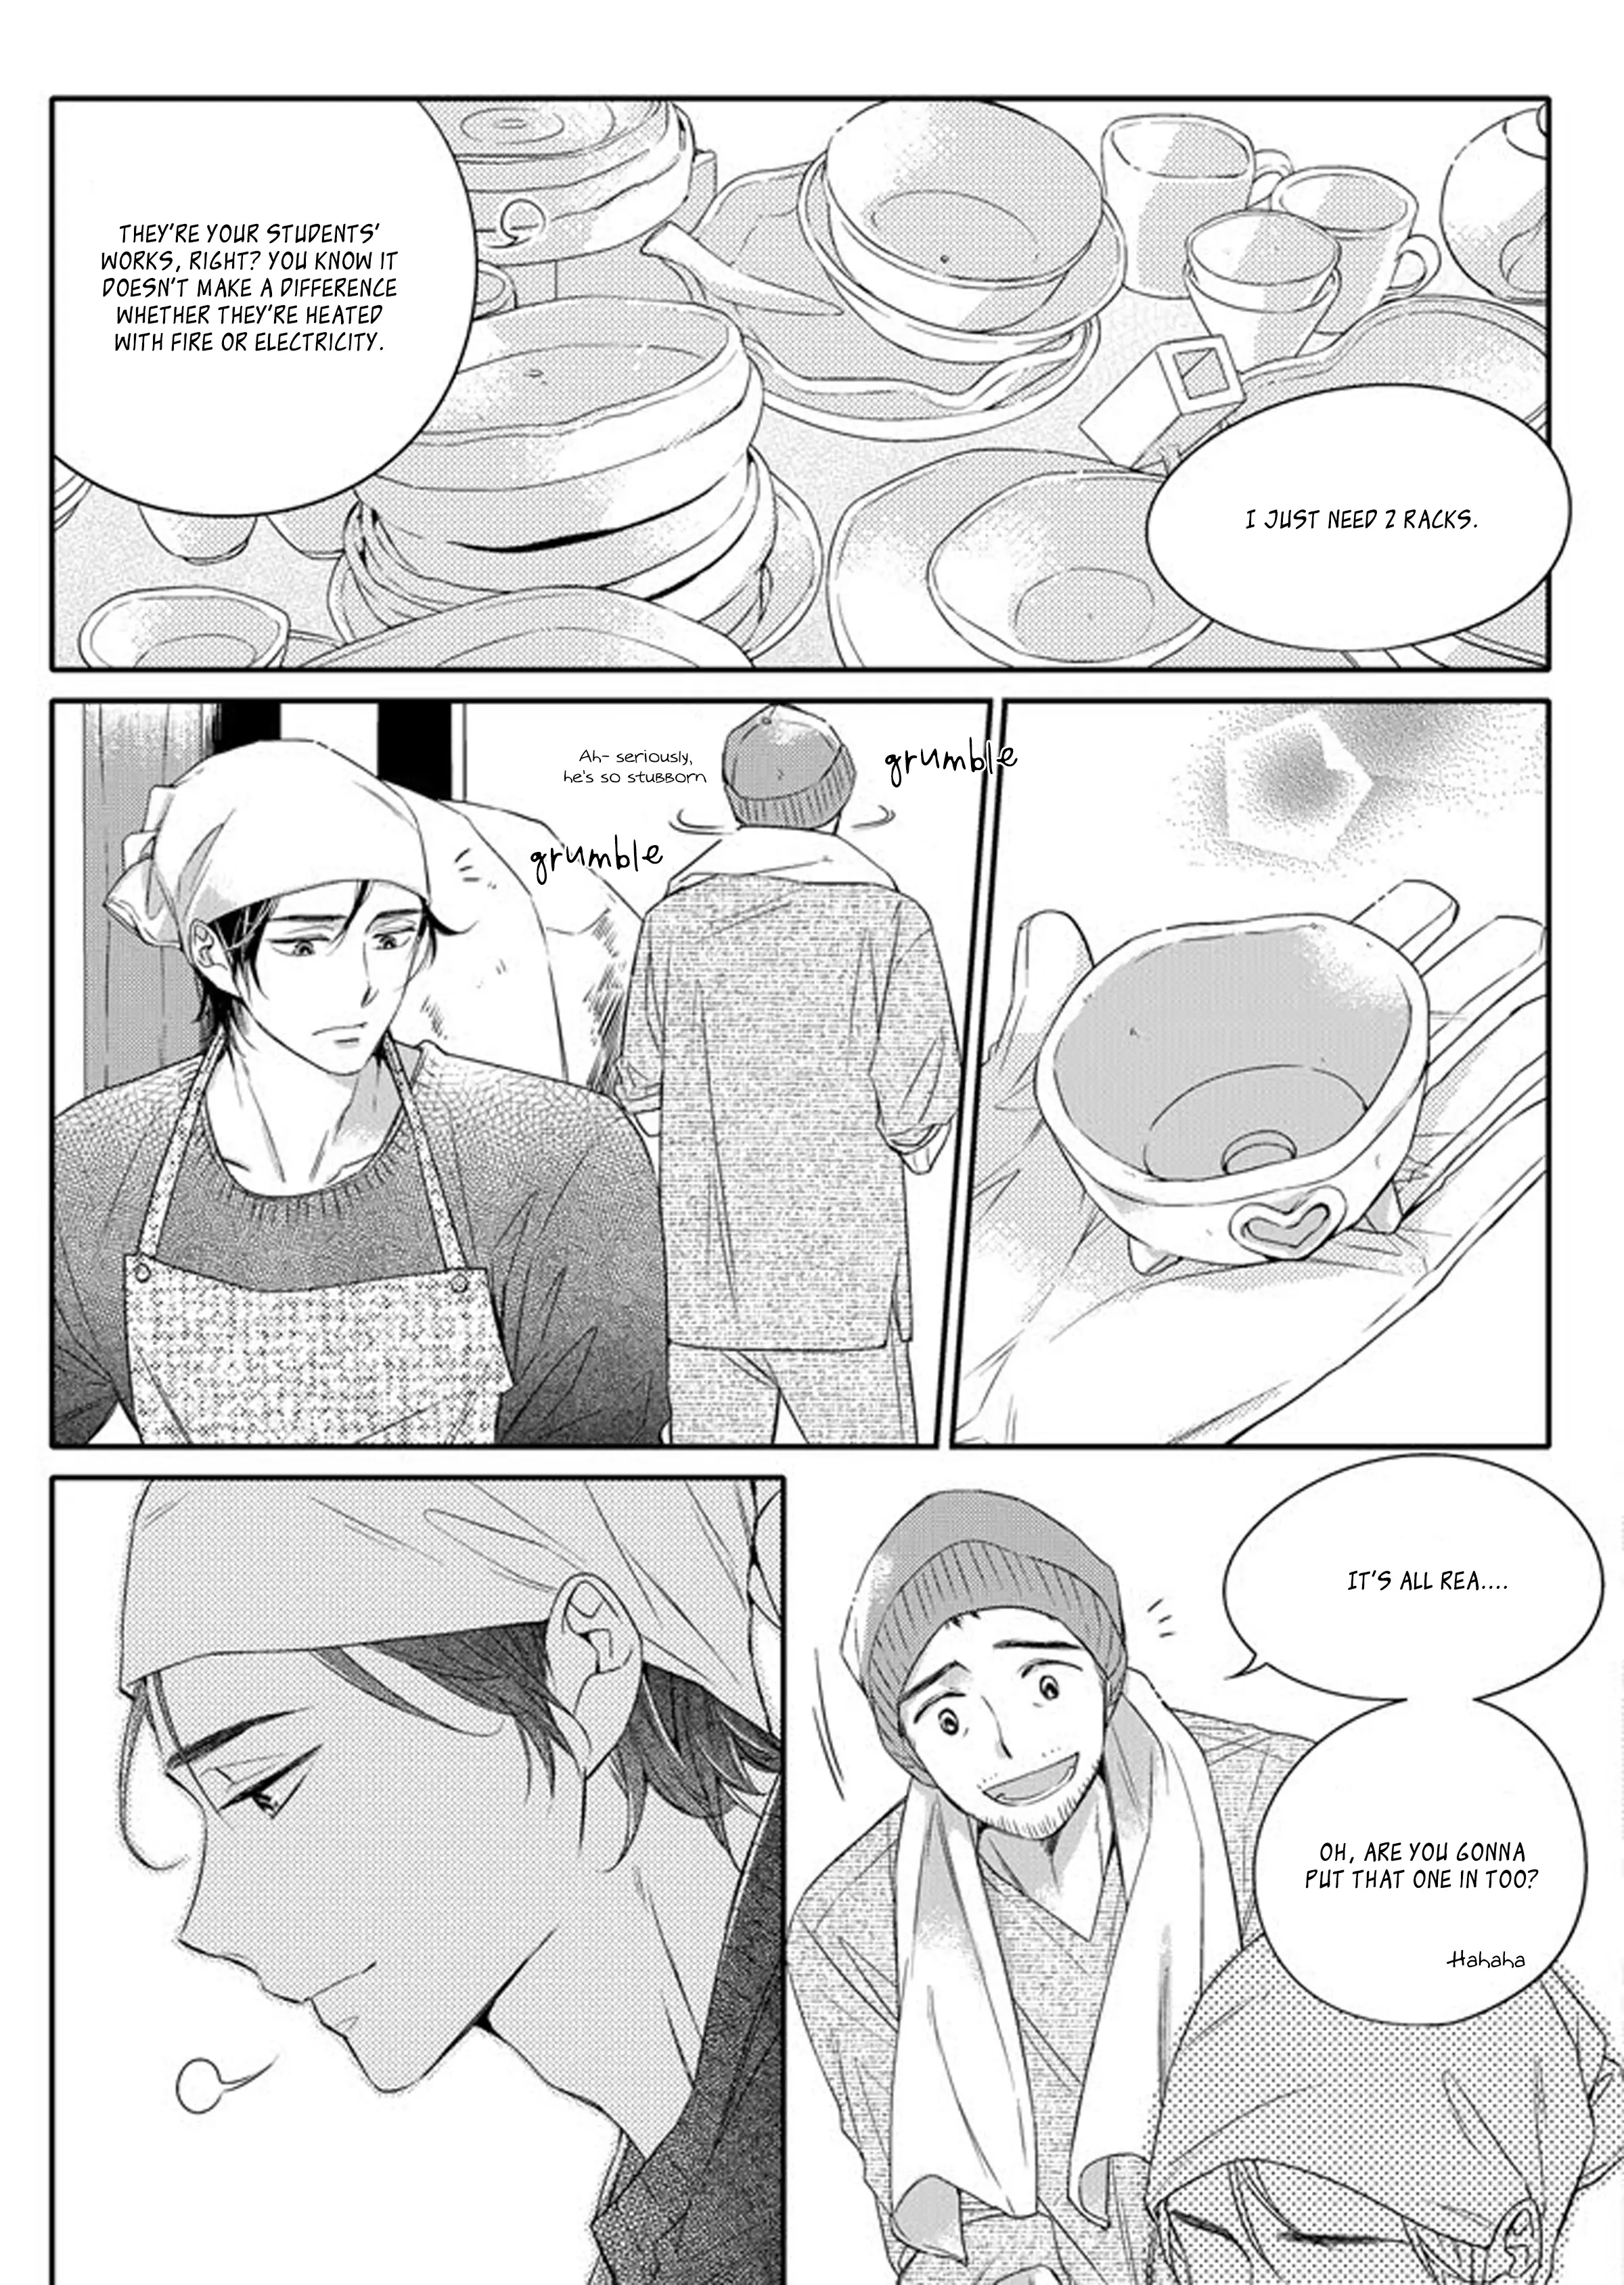 Unintentional Love Story - 7 page 4